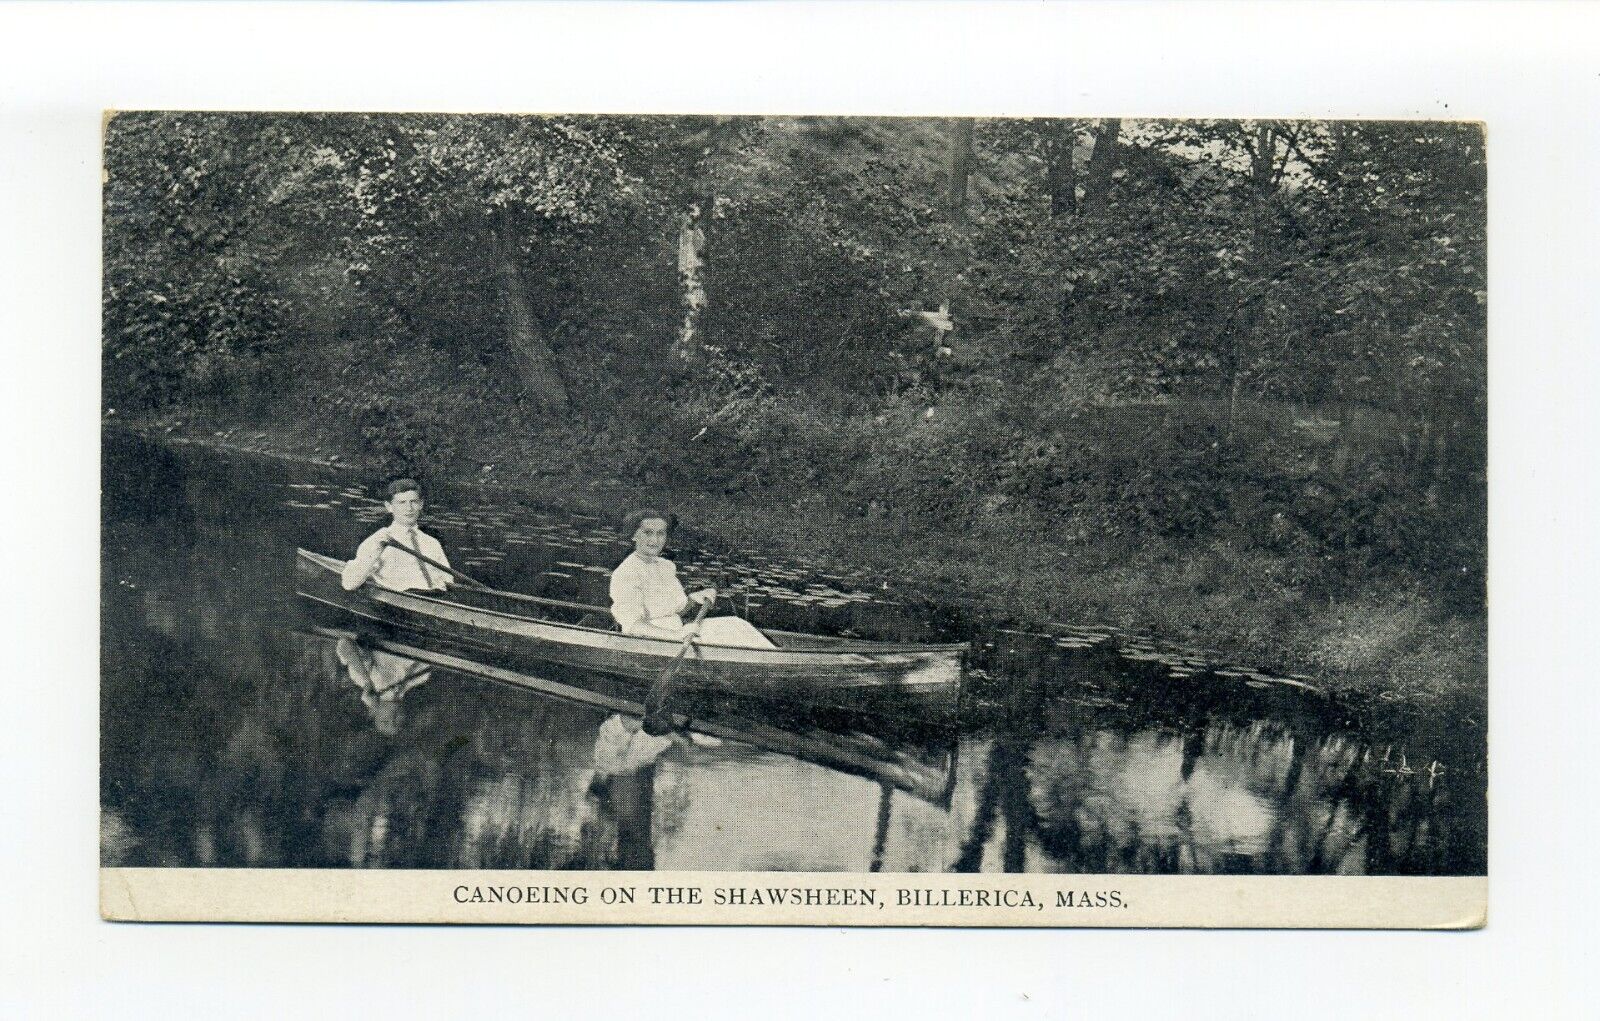 Billerica MA postcard, Canoeing on the Shawsheen, paddling on tranquil water